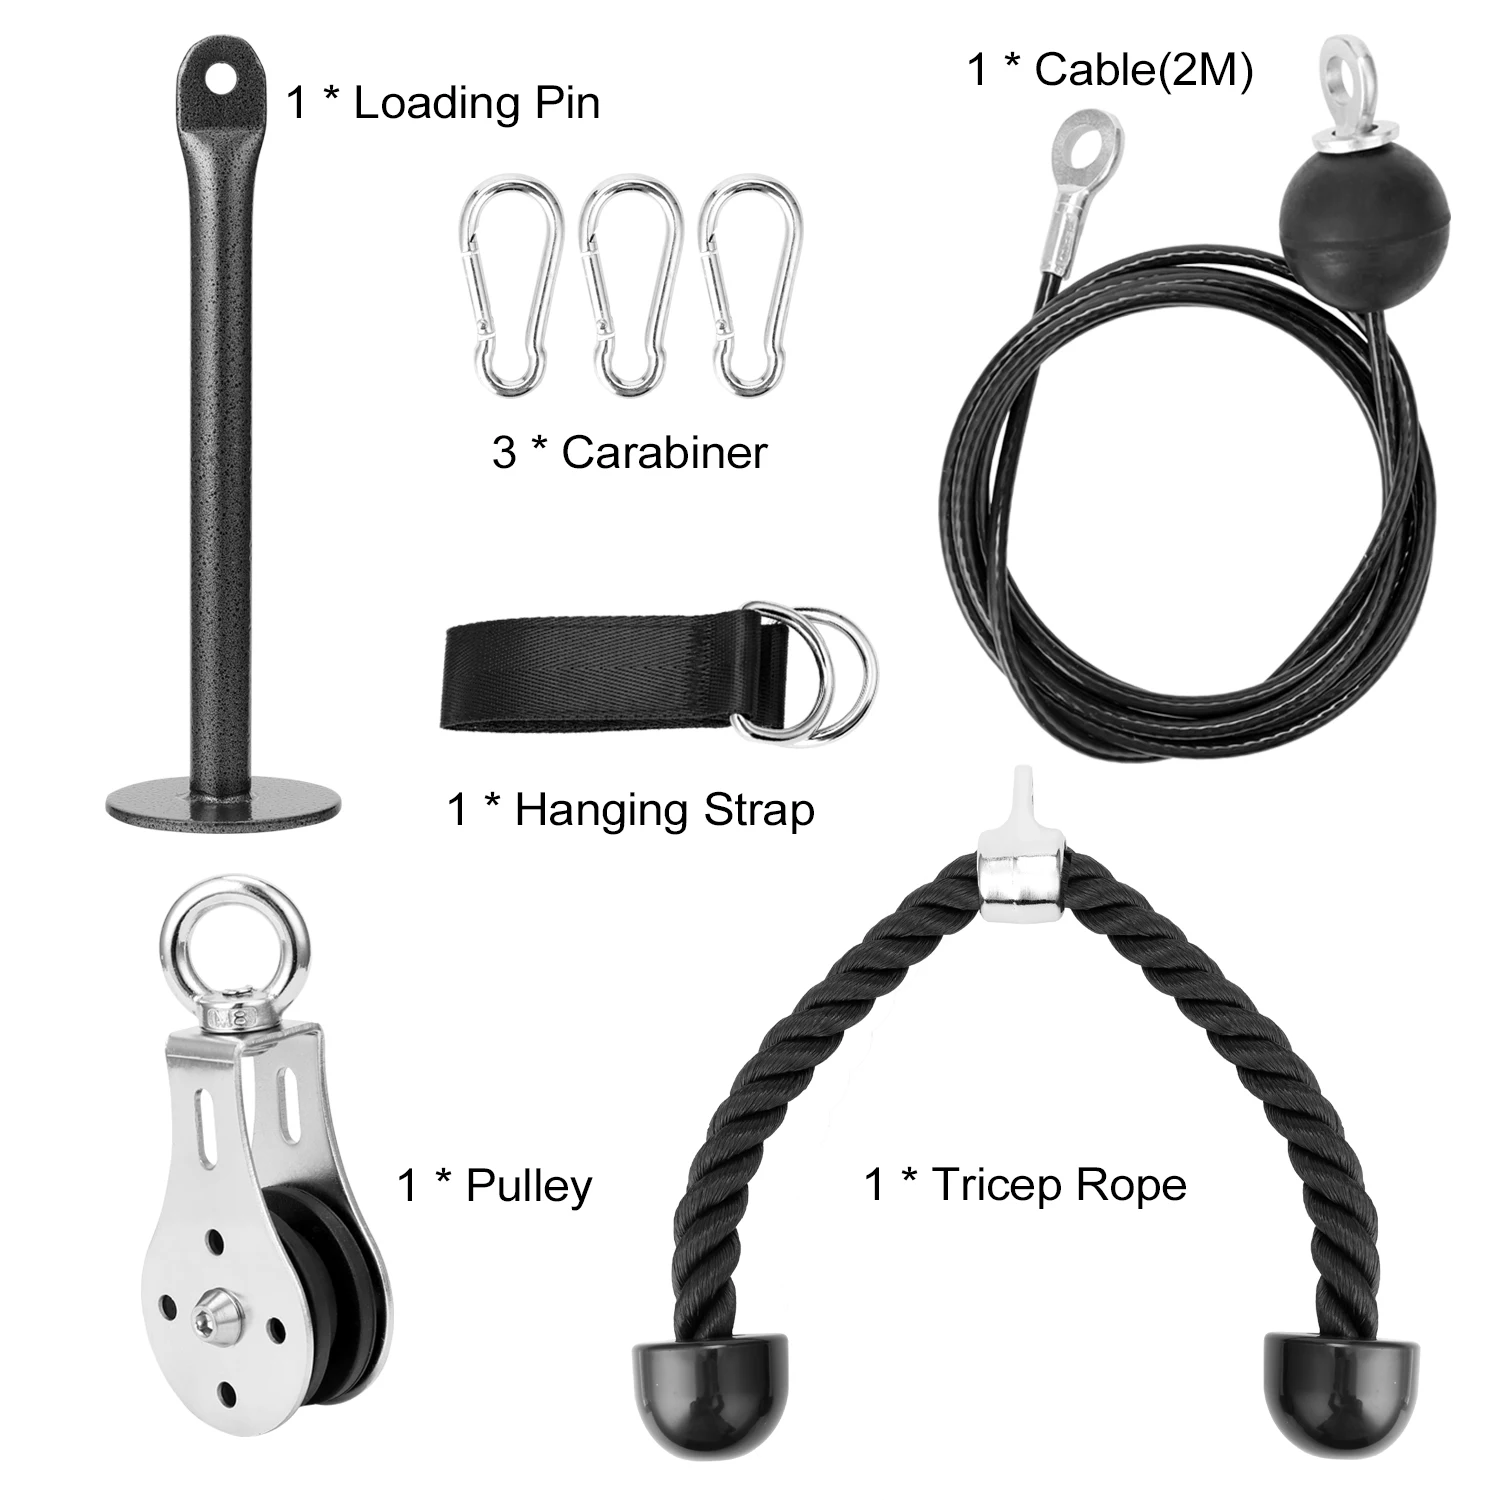 Fitness DIY Pulley Cable Machine Attachment System Loading Pin Lifting Arm